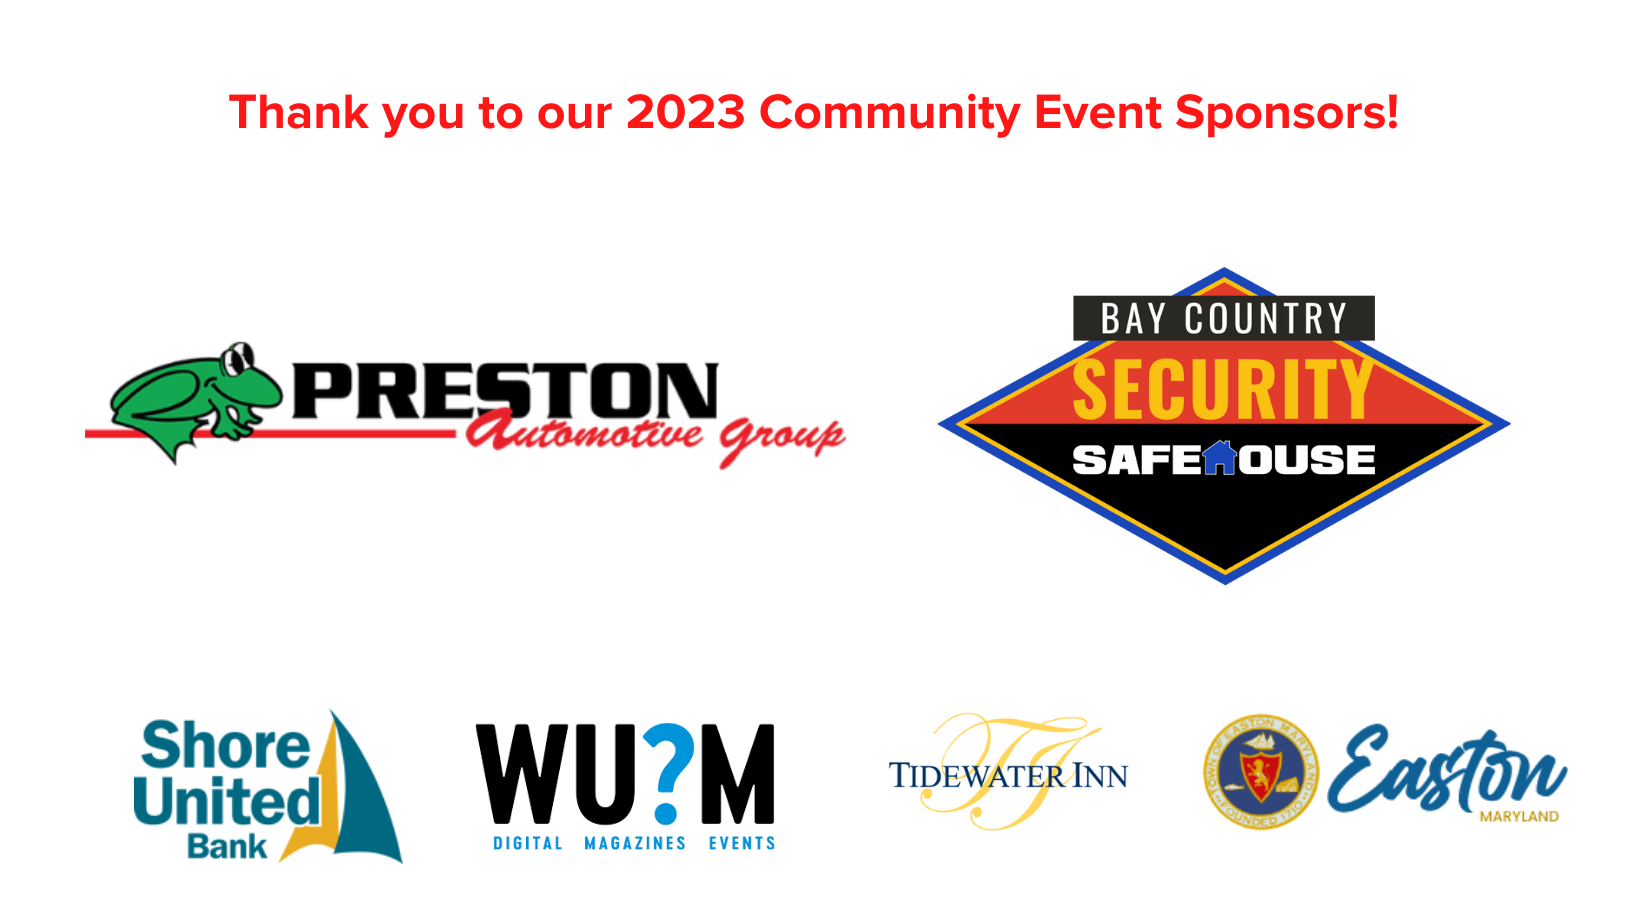 Thank you to our 2023 Community Event Sponsors! (3)